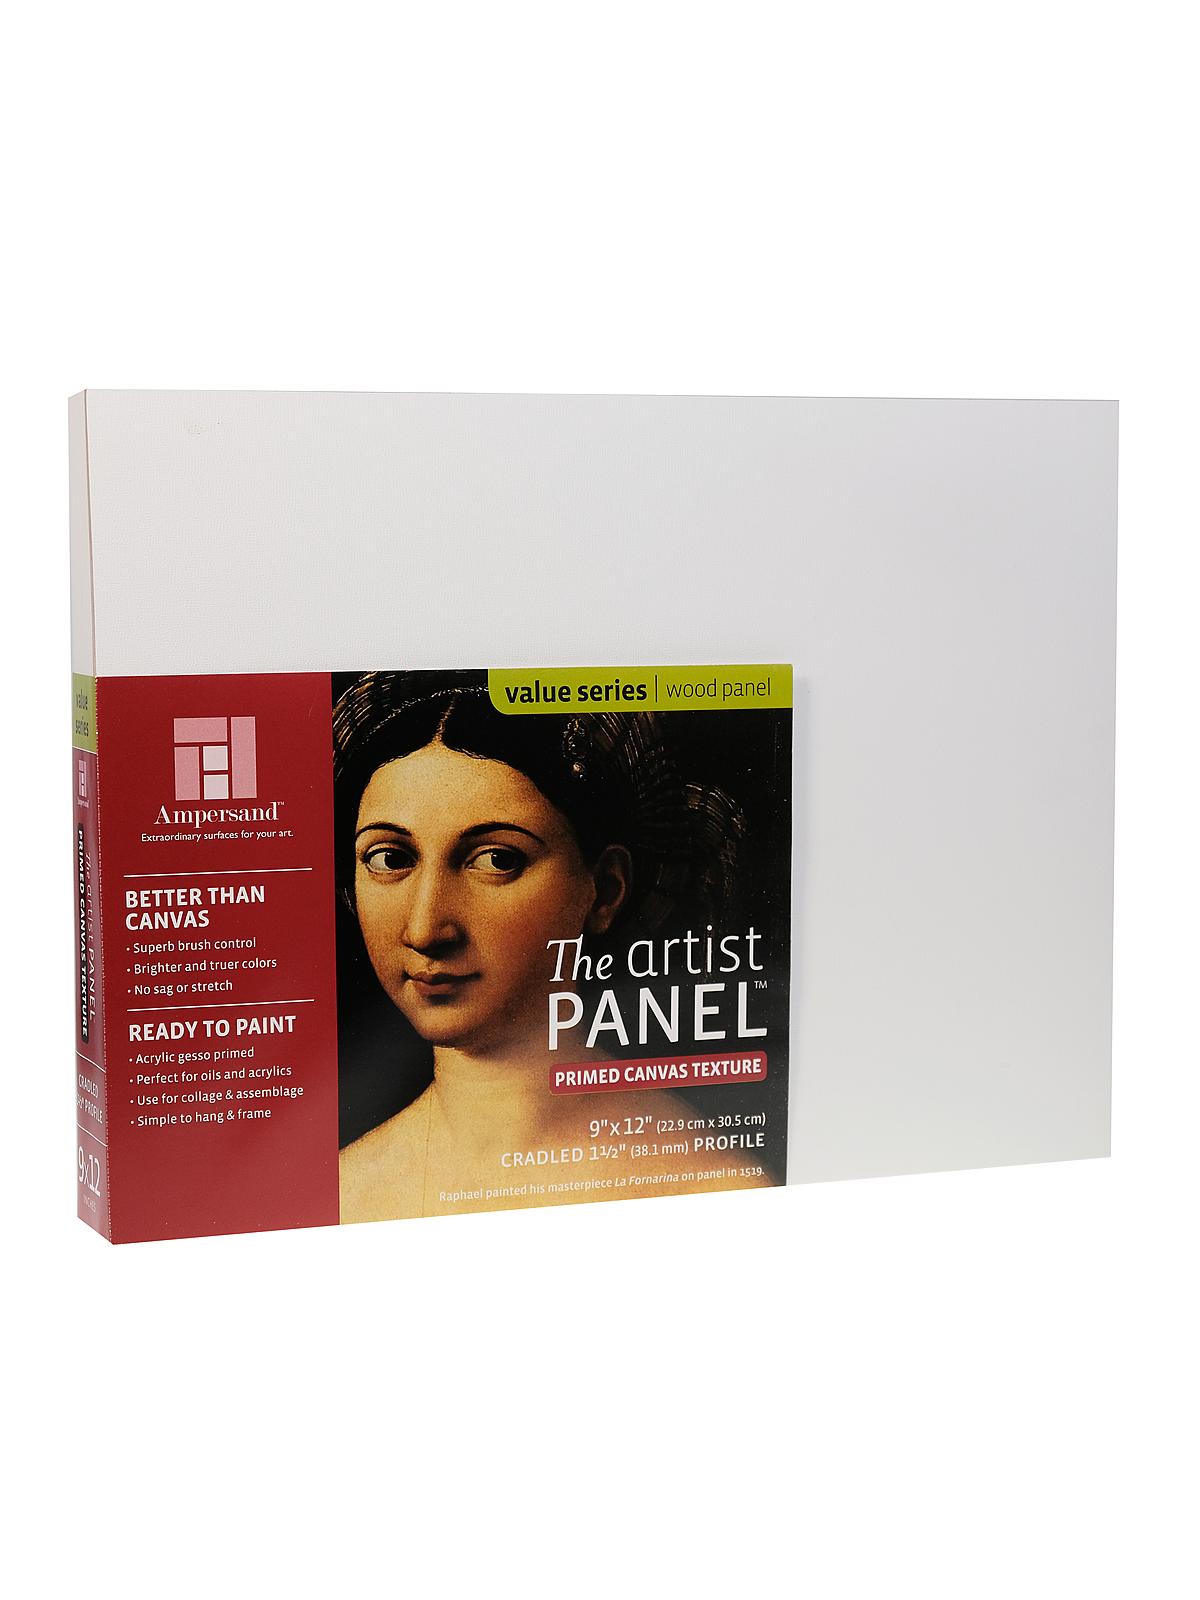 The Artist Panel Canvas Texture Cradled Profile 9 In. X 12 In. 1 1 2 In.